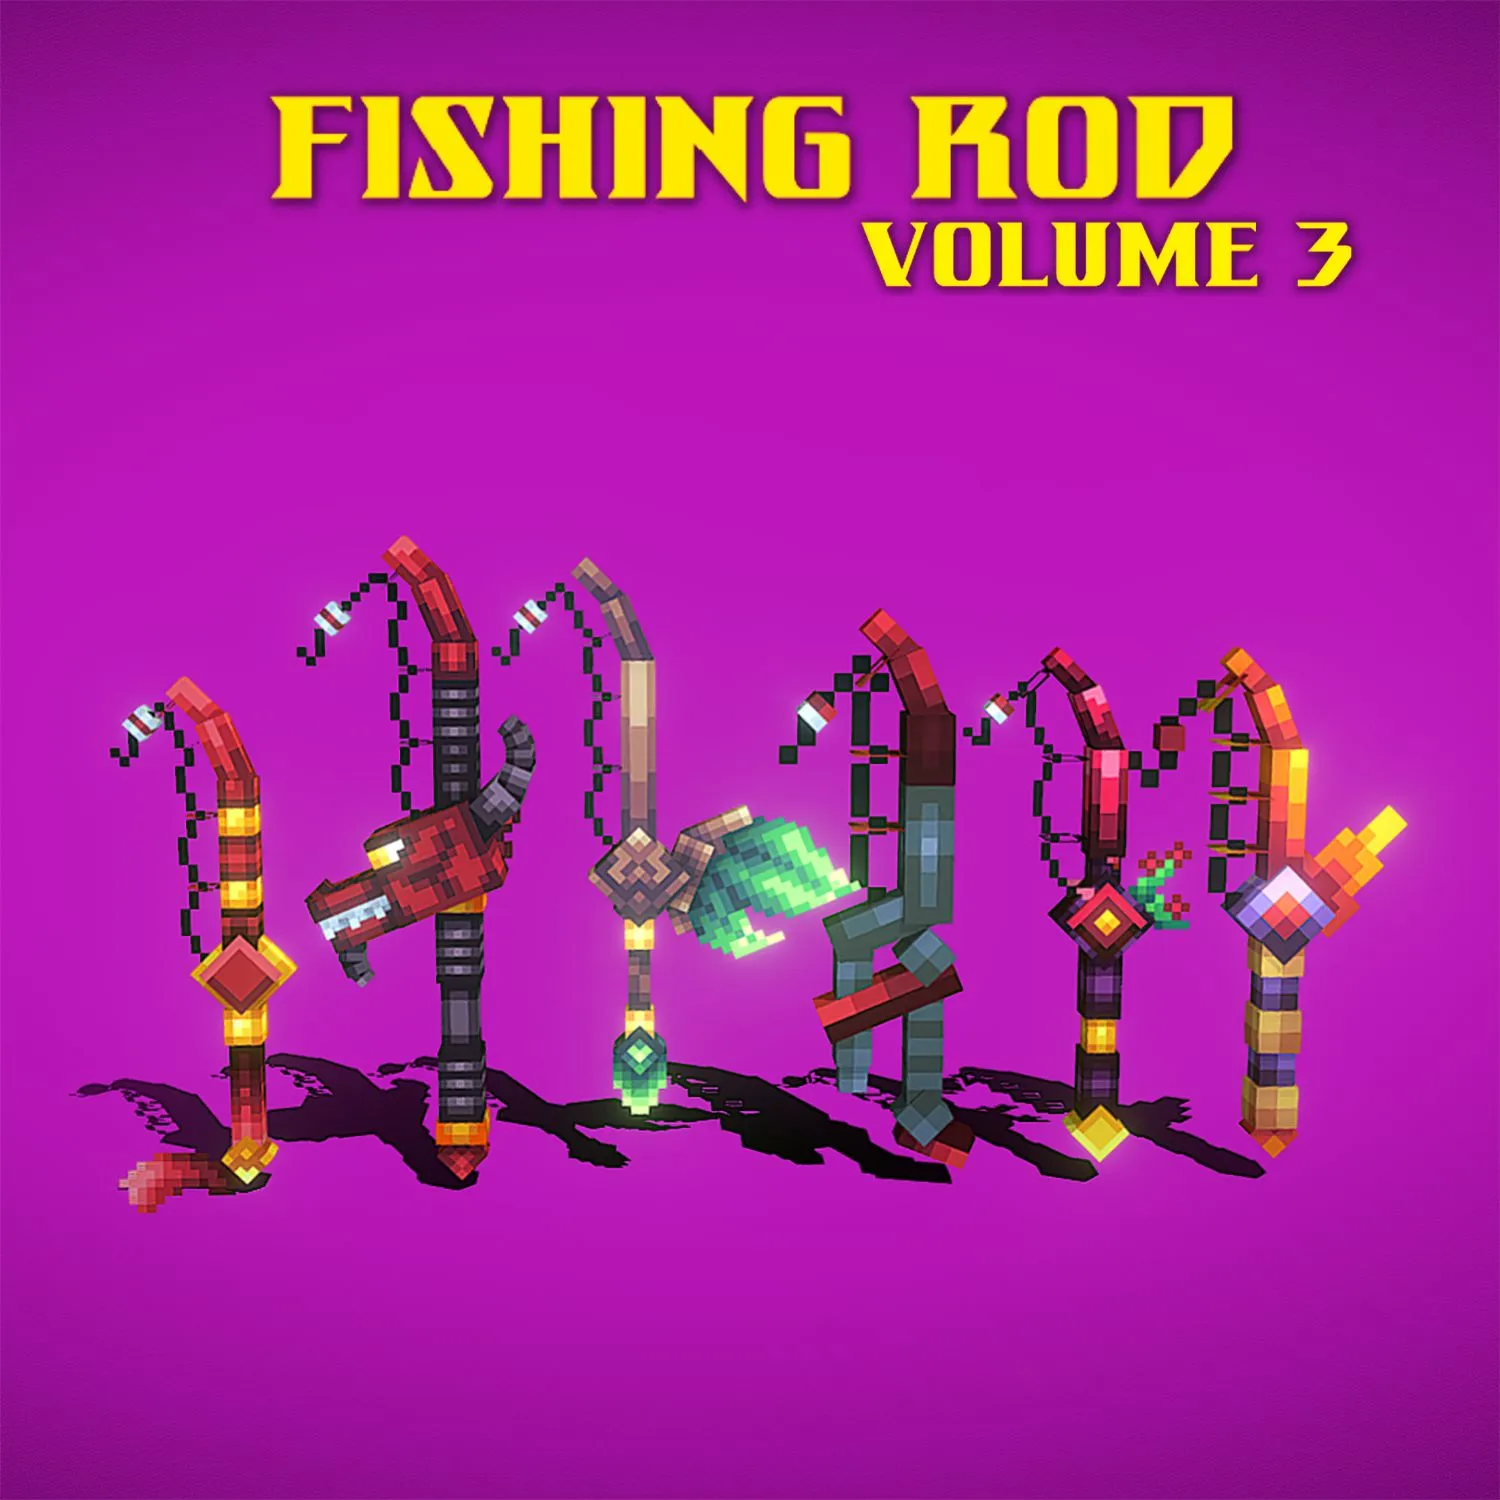 Buy the 3pc Bundle of Assorted Fishing Rods